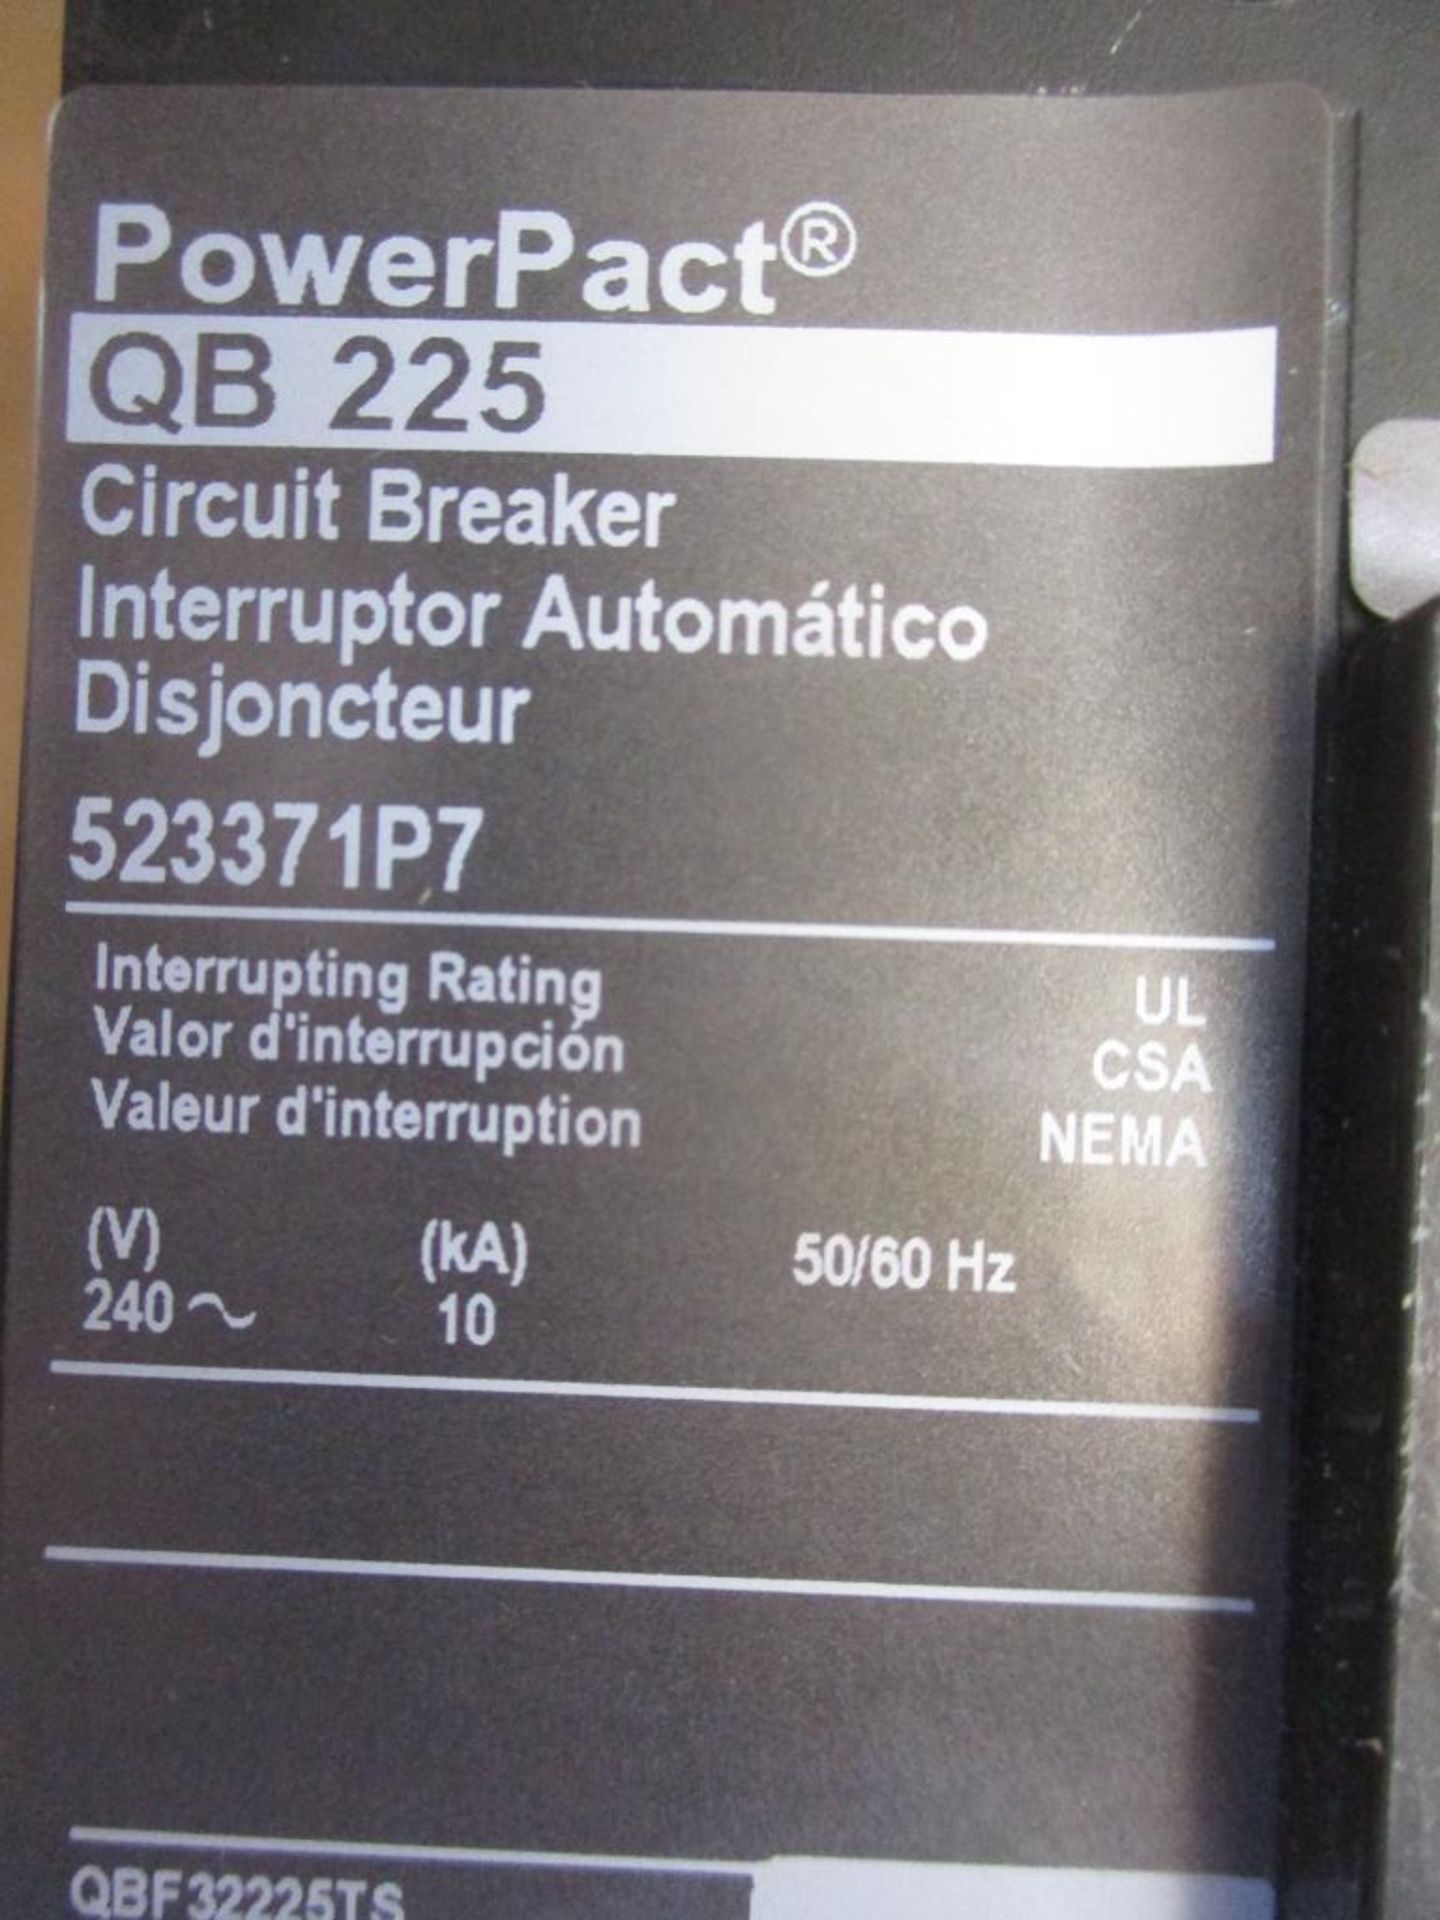 Square D 225 AMP Circuit Breaker, 523371P7, 225A, 3P, 240VAC, PowerPacT QB225 (New in Box) - Image 3 of 4